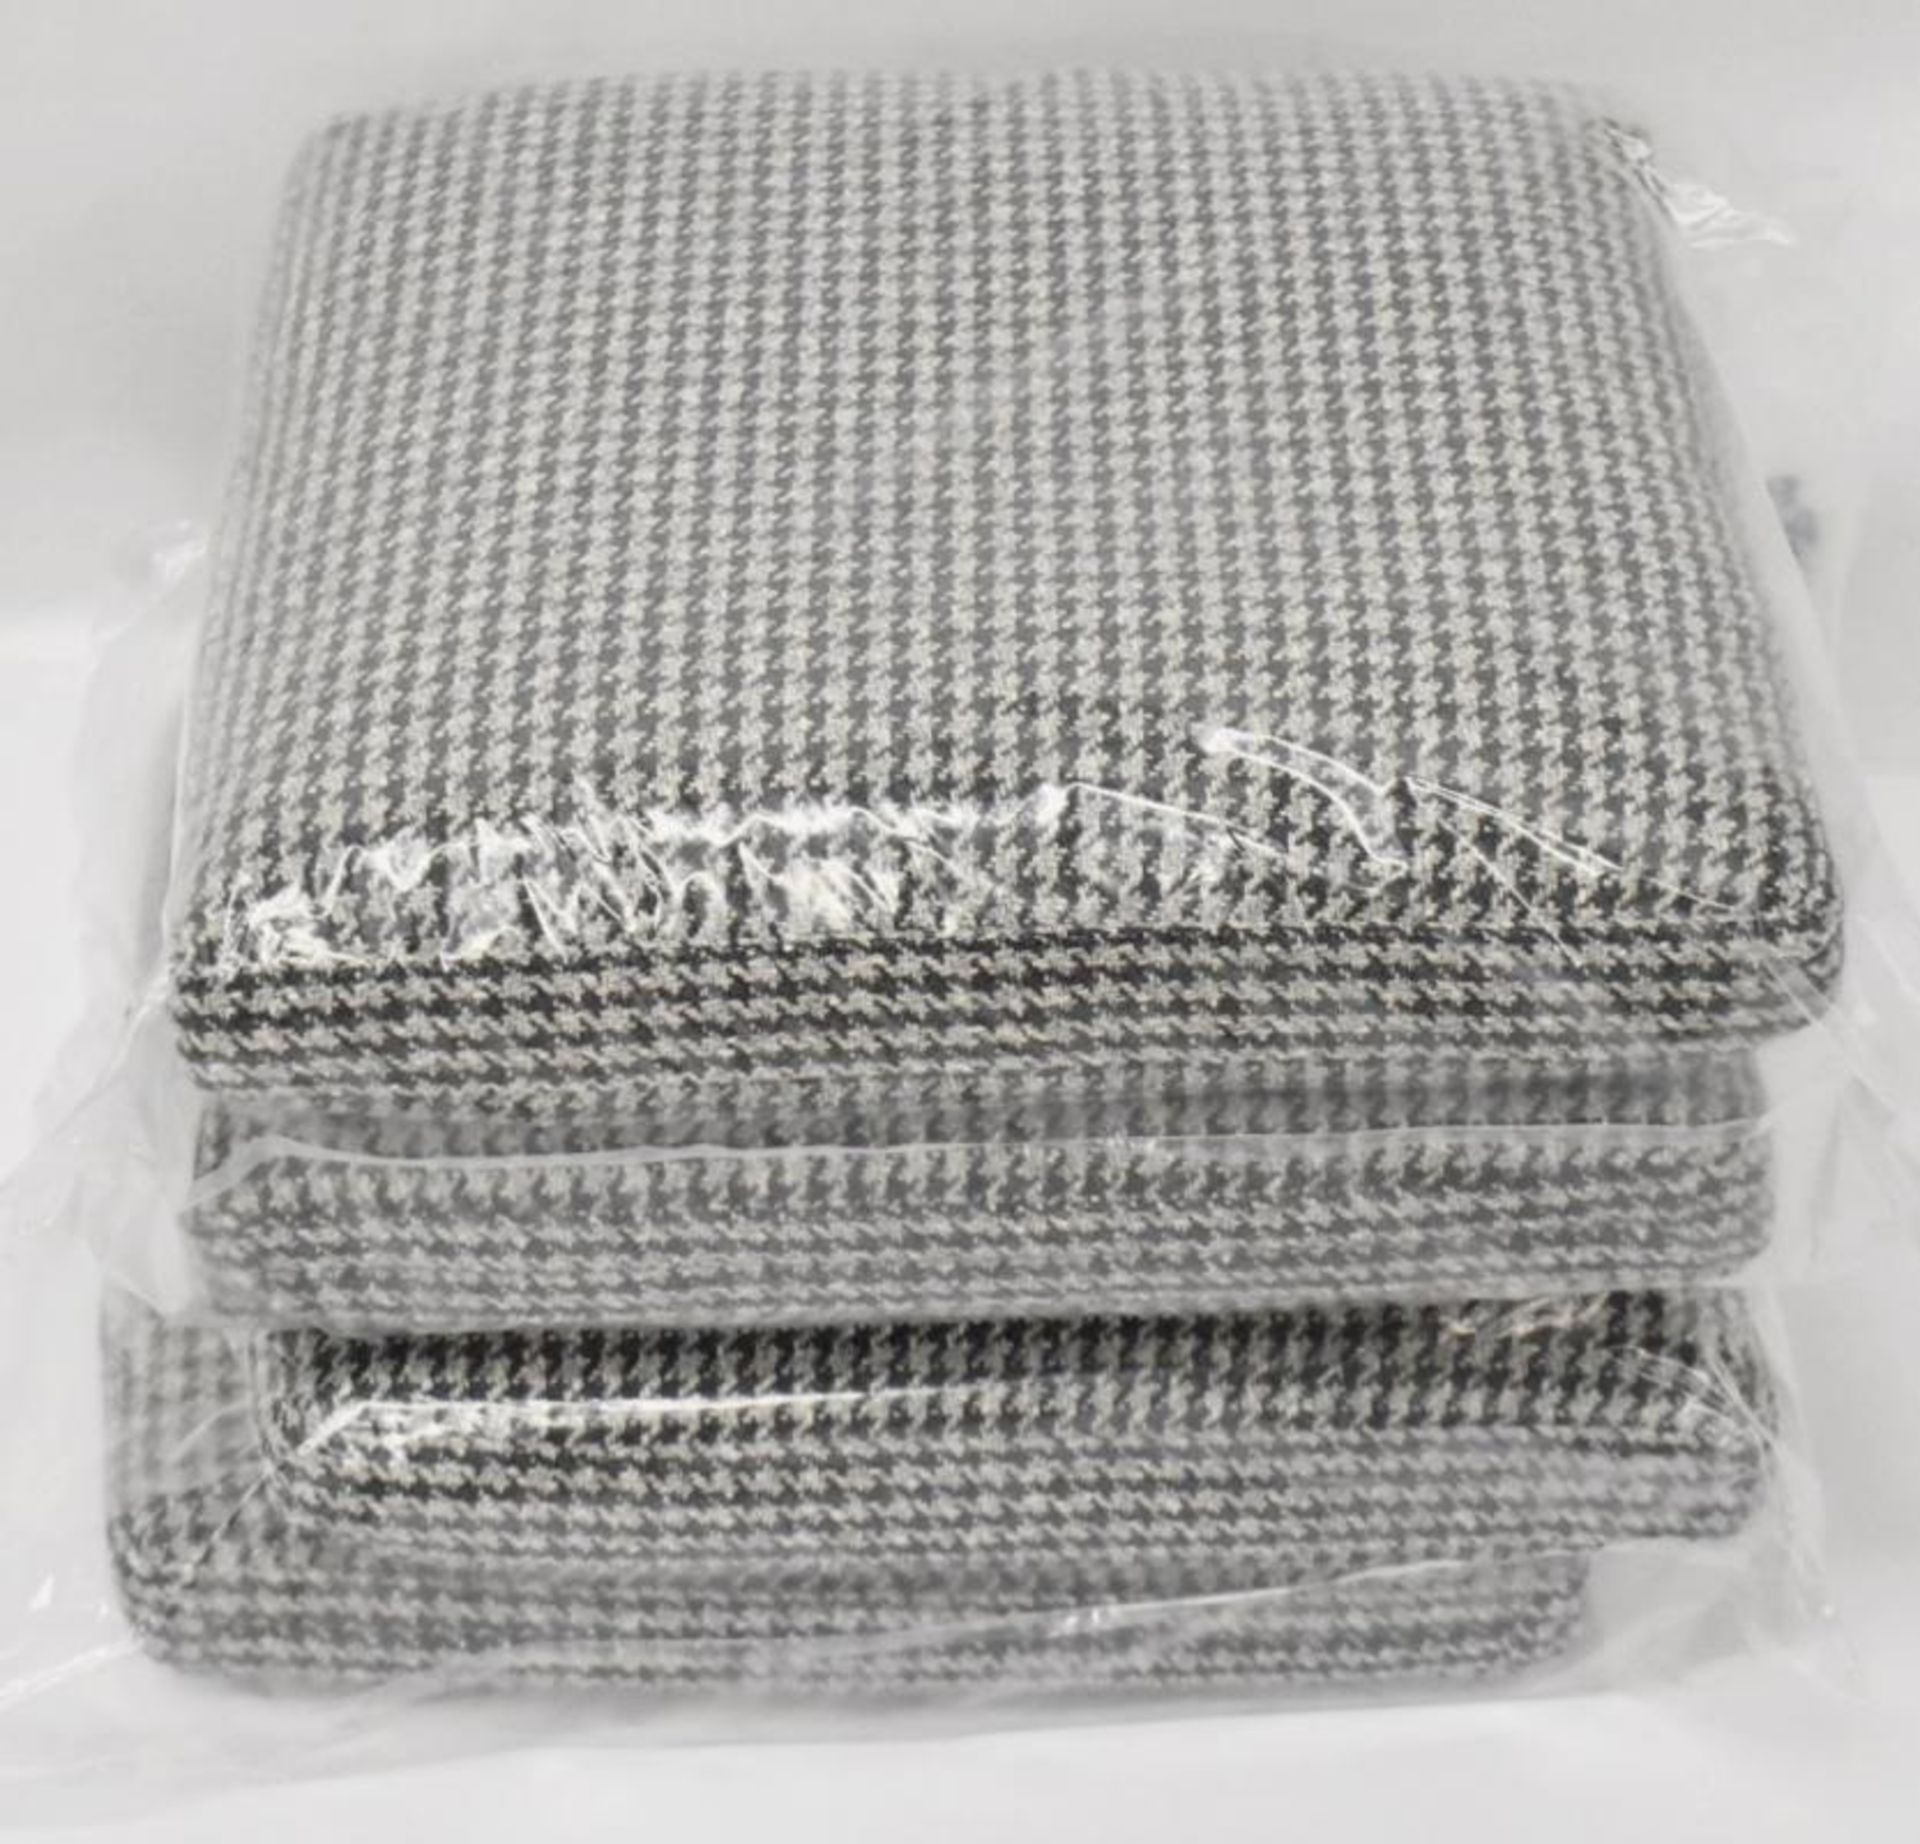 4 x B&B ITALIA 'Andy 13' Sofa Back Cushions In A Premium Woven Houndstooth Fabric - Ref: 5089331/A/P - Image 4 of 4